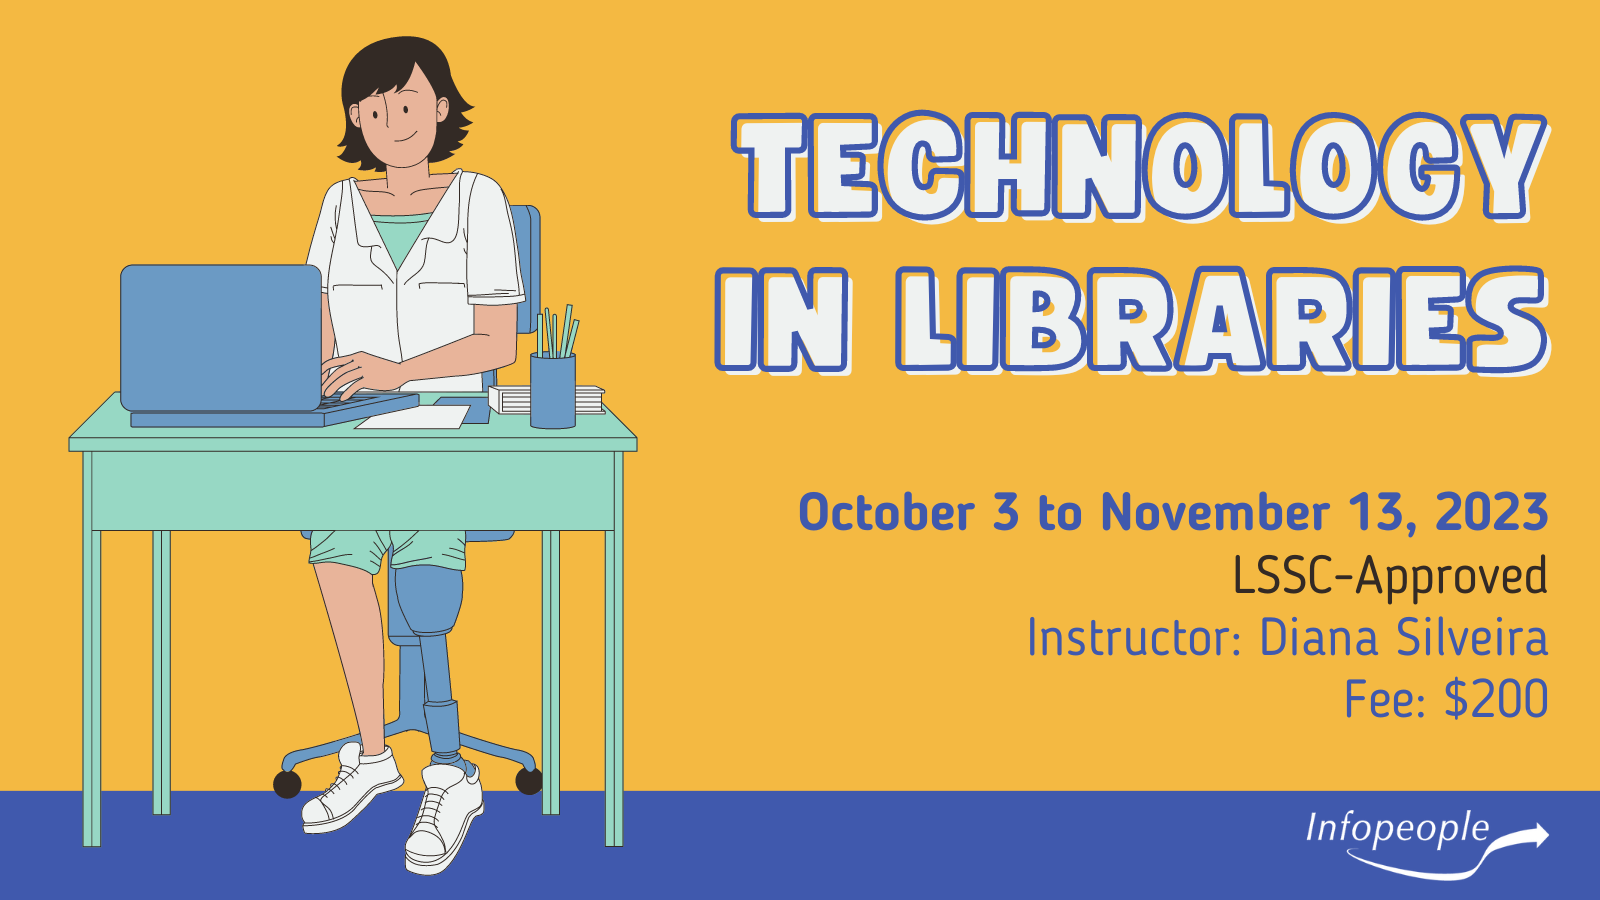 Technology in Libraries - an Infopeople Course. October 3 to November 13, 2023. LSSC-approved. Instructor: Diana Silveira. Fee: $200. Woman with a prosthetic leg working at a standing desk on a laptop.